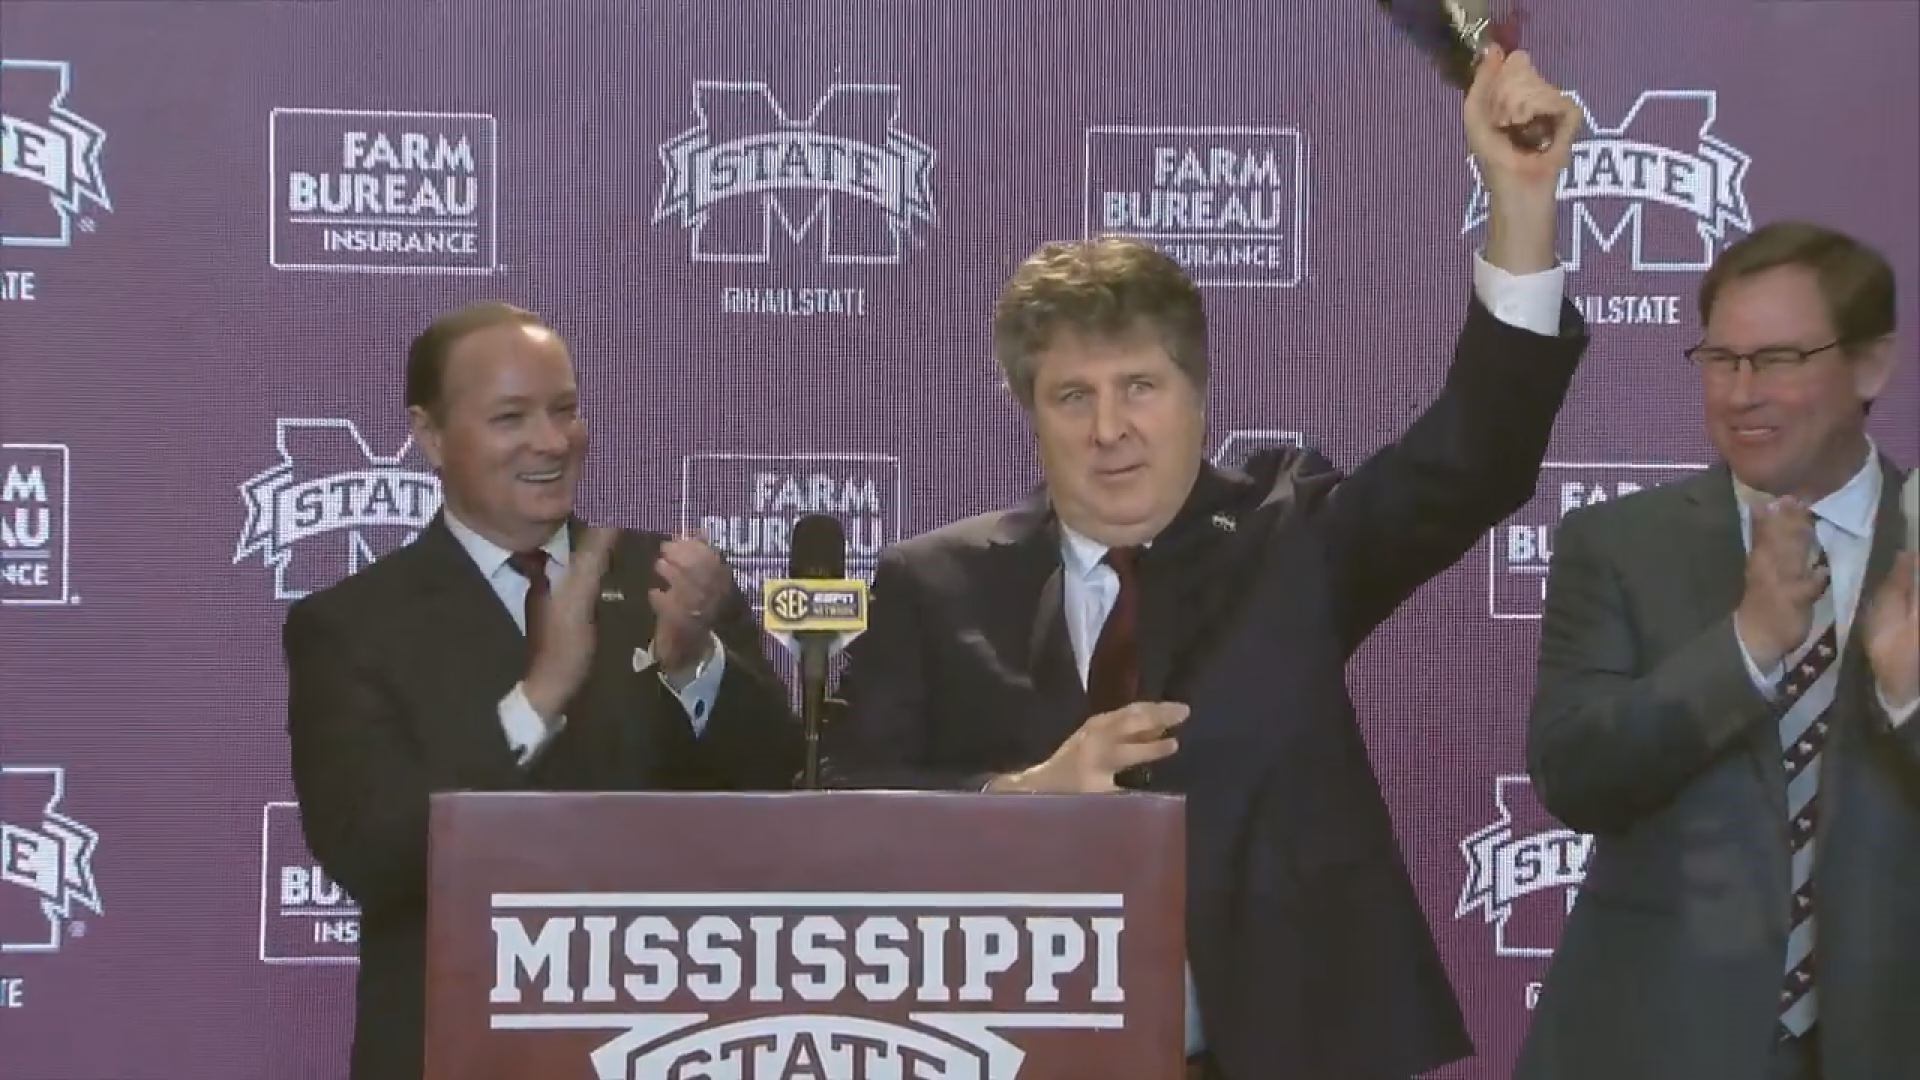 Leach spoke to the media for the first time as the Mississippi State head football coach on Friday.